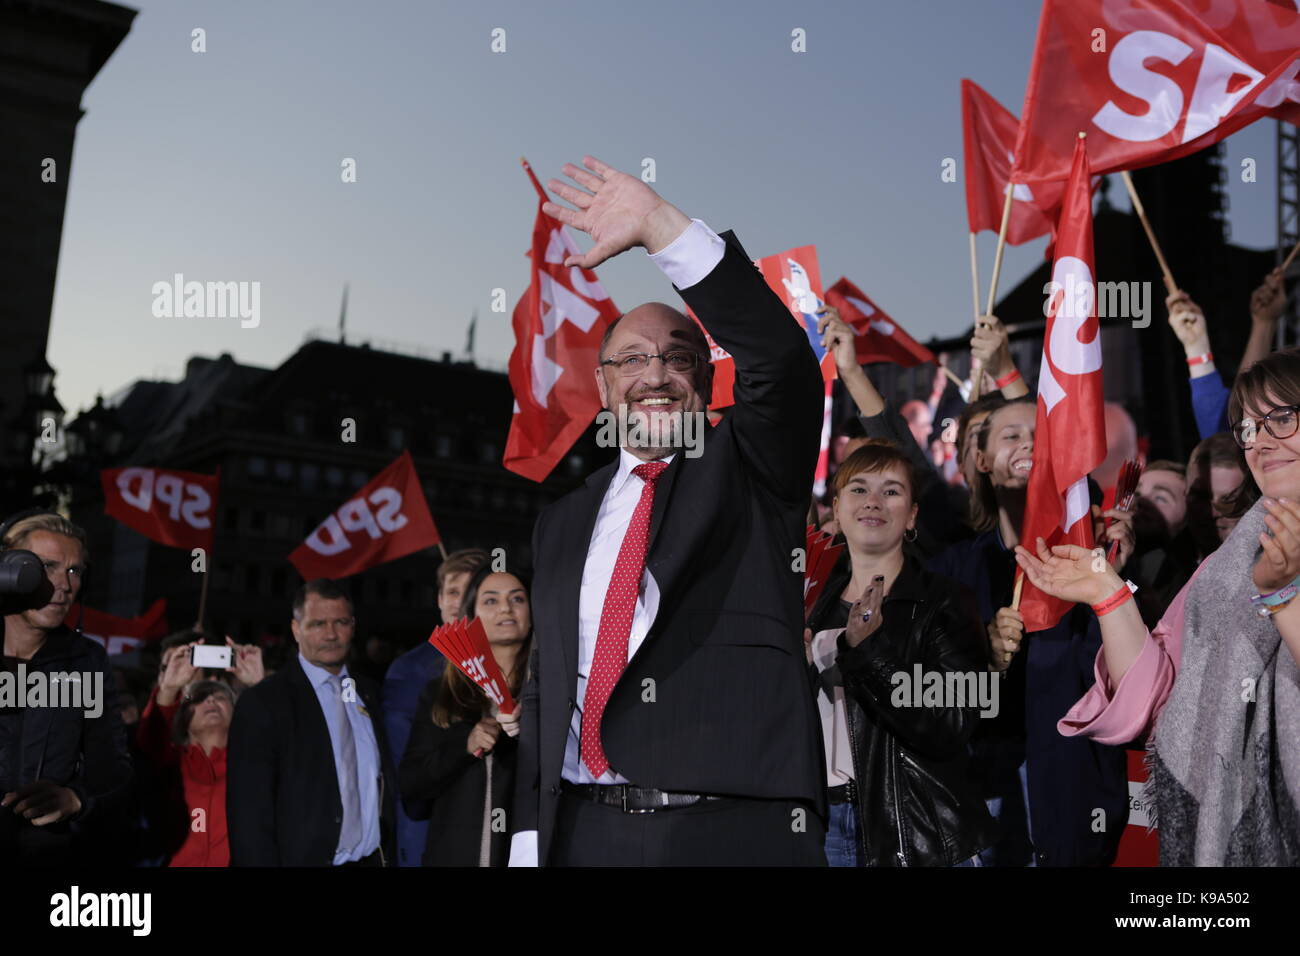 Berlin, Germany. 22nd Sep, 2017. Martin Schulz waves at the crowd. The candidate for the German Chancellorship of the SPD (Social Democratic Party of Germany) was the main speaker at a large rally in the centre of Berlin, two days ahead of the German General Election. Credit: SOPA Images Limited/Alamy Live News Stock Photo